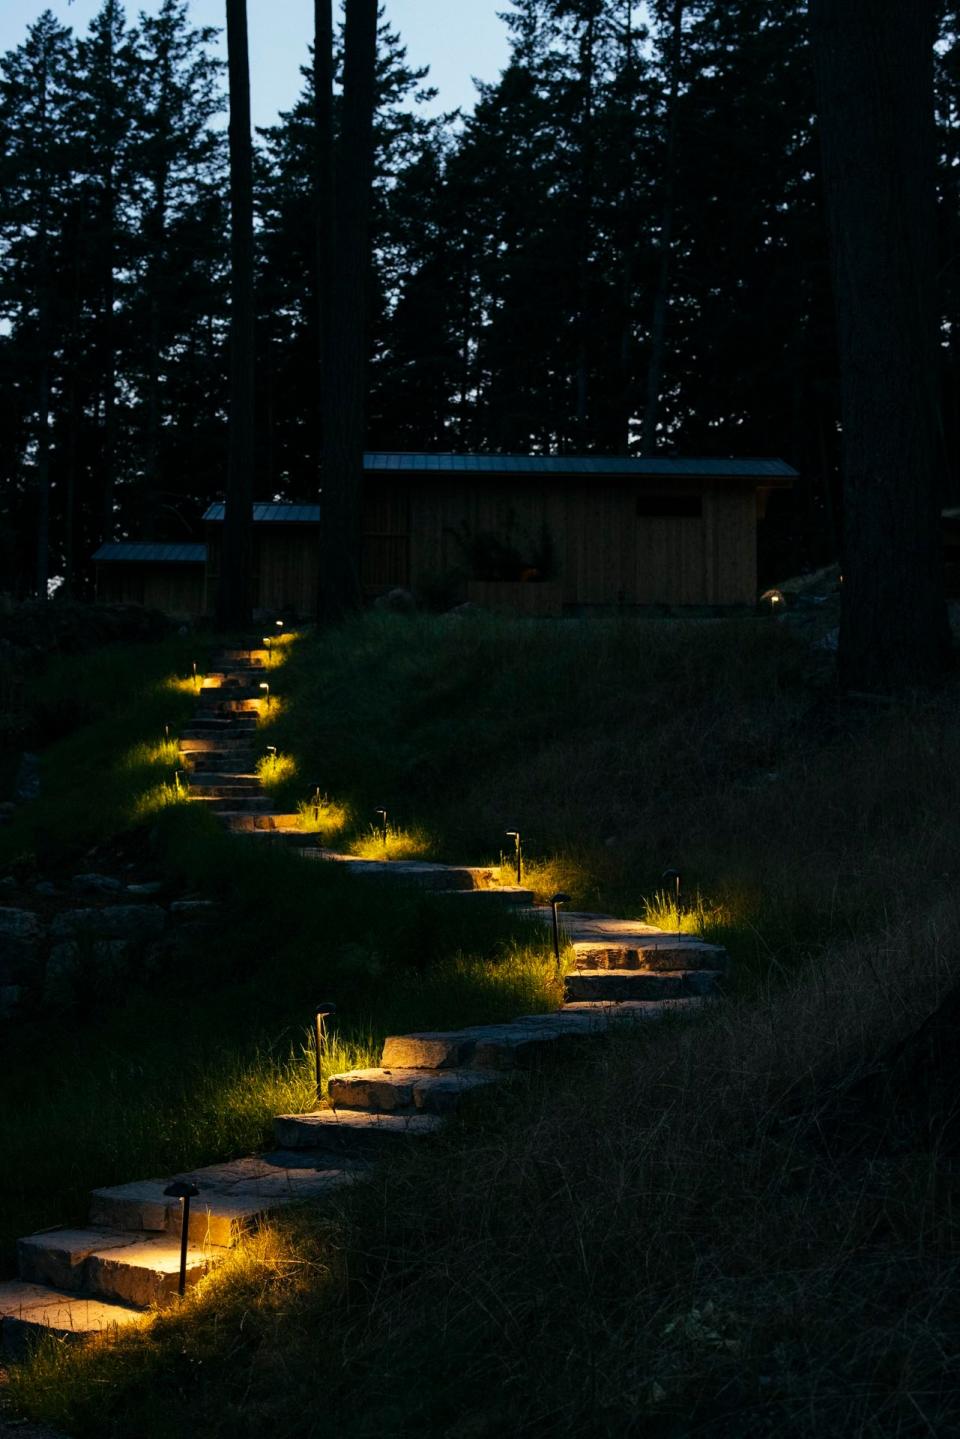 The path to the cabins at night.